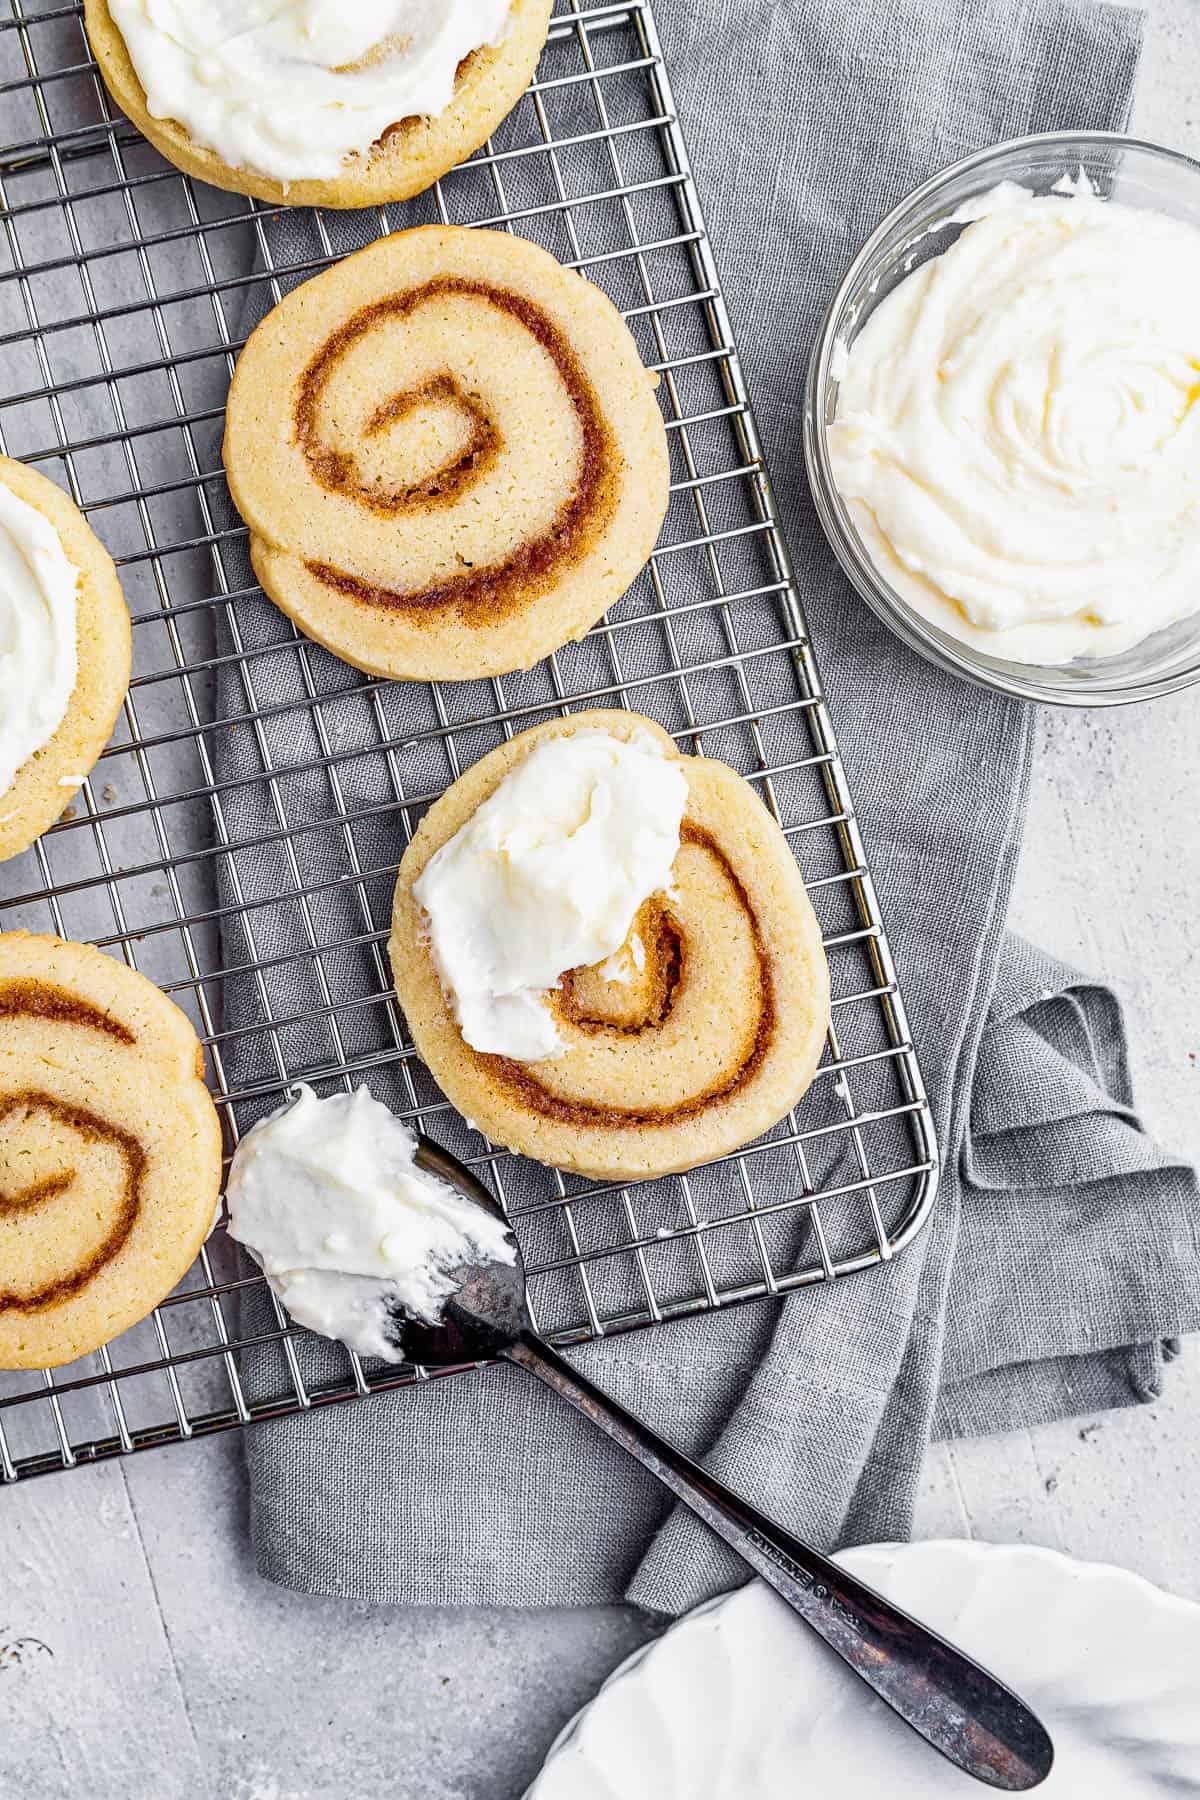 Six Cinnamon Roll Sugar Cookies on a Wire Rack on Top of a Gray Kitchen Towel